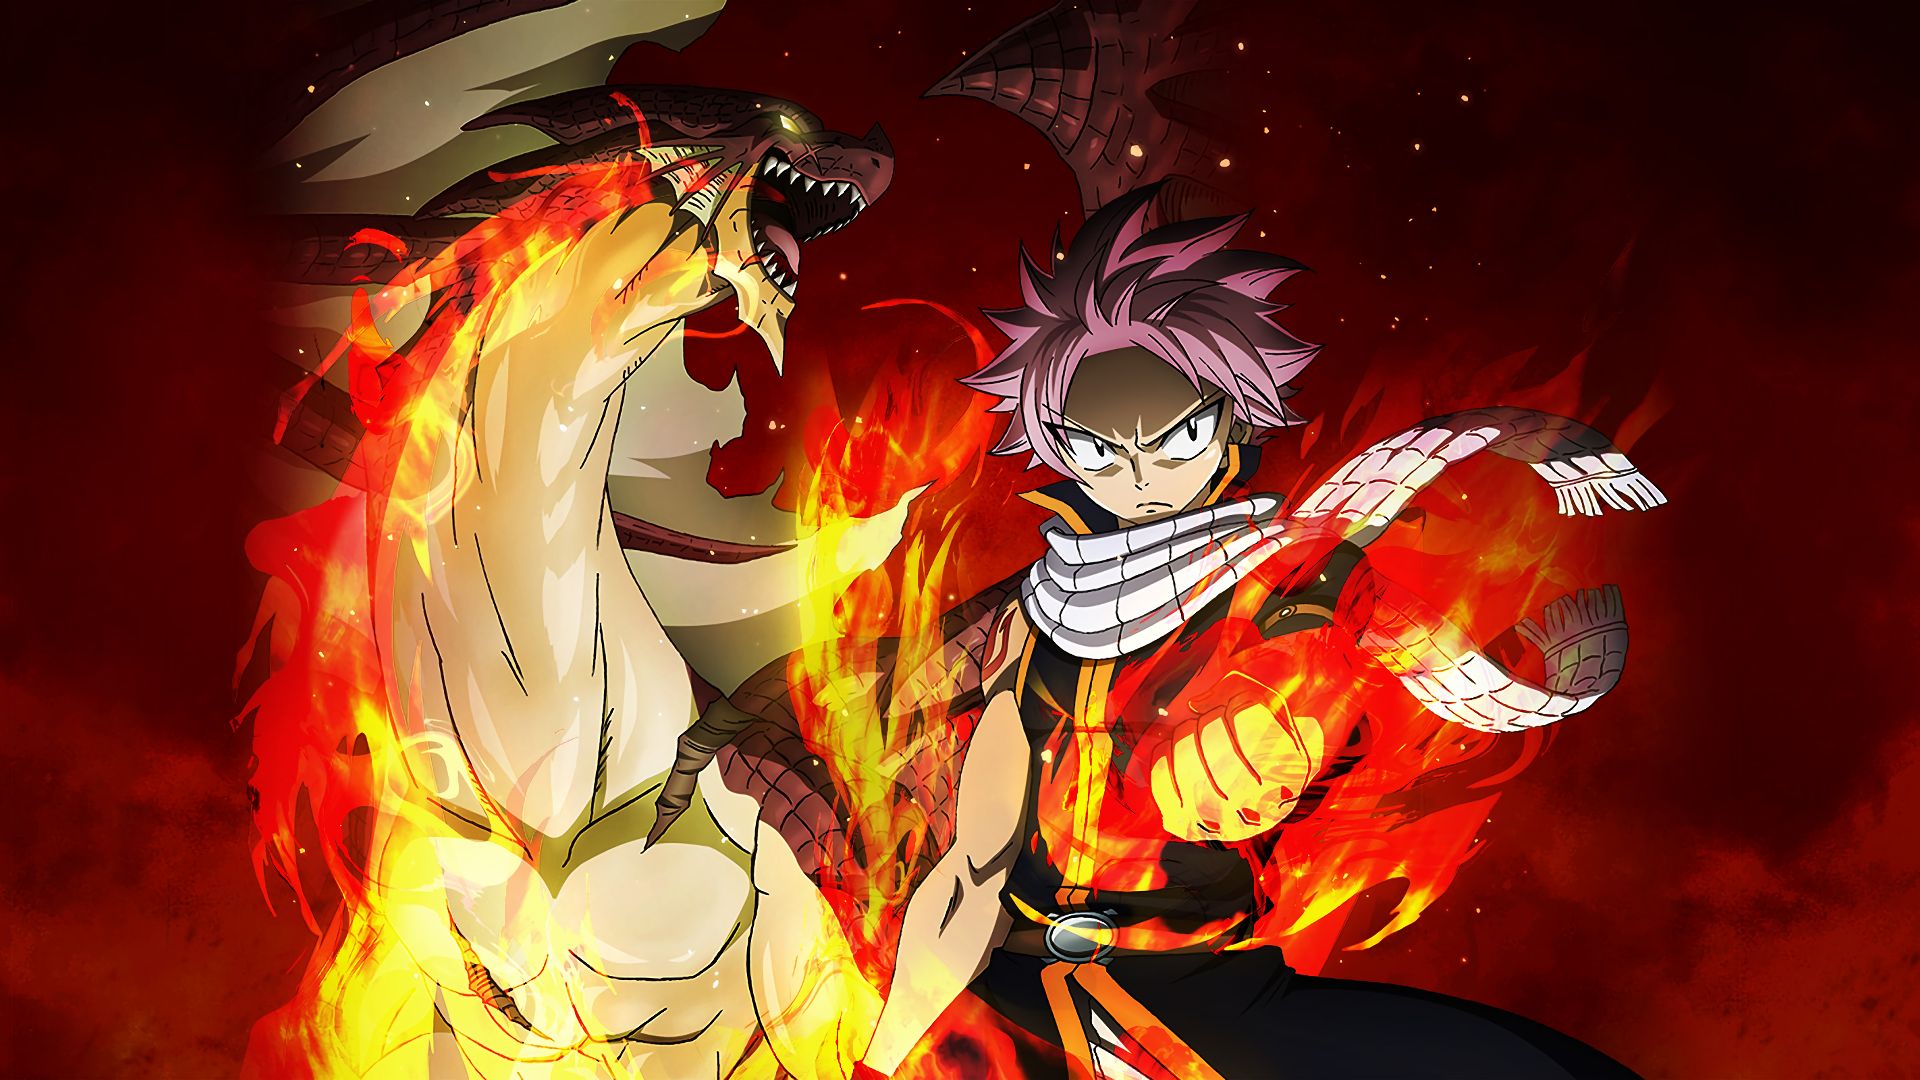 CelestialRayna — A new picture to Fairy Tail. You can see Natsu